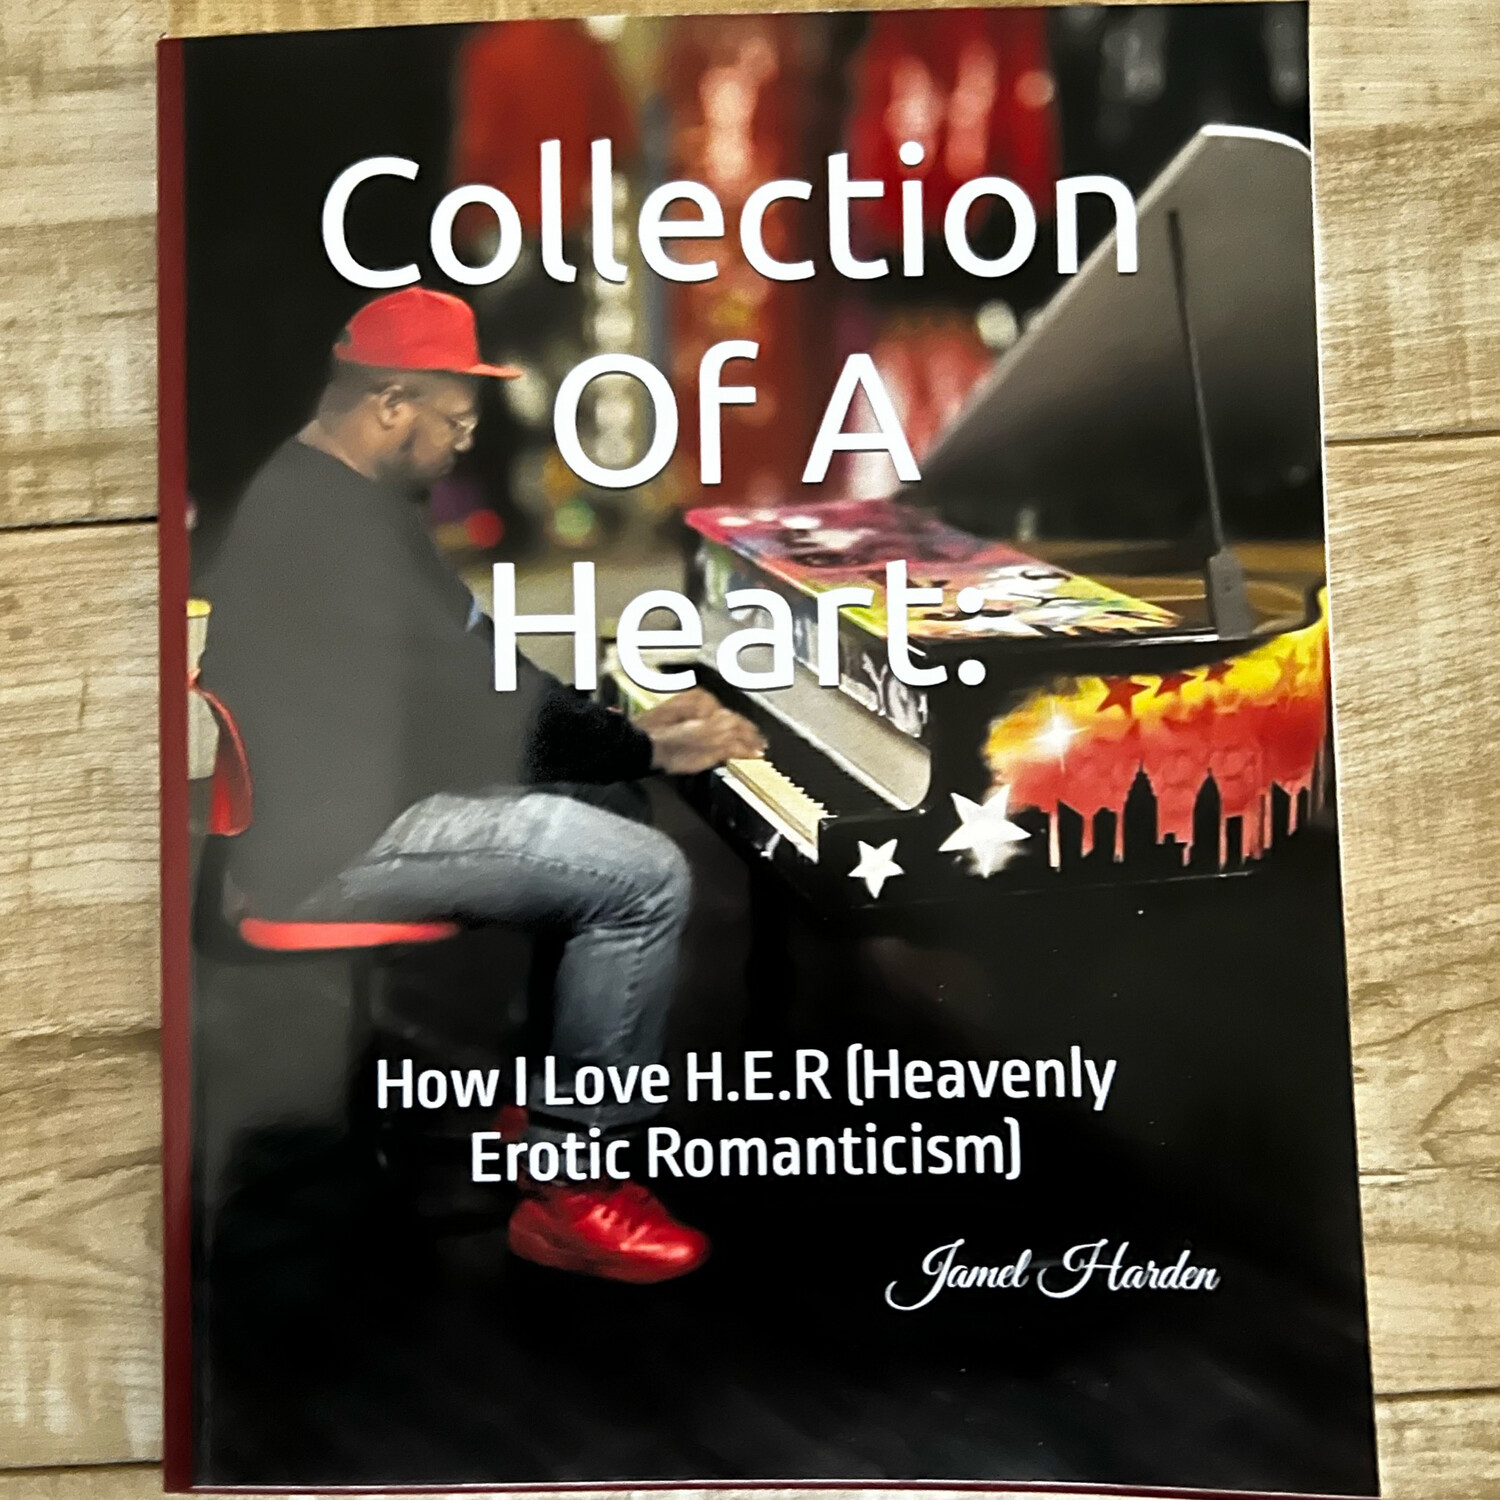 Collection Of A Heart: How I Love H.E.R. (Heavenly Erotic Romanticism)